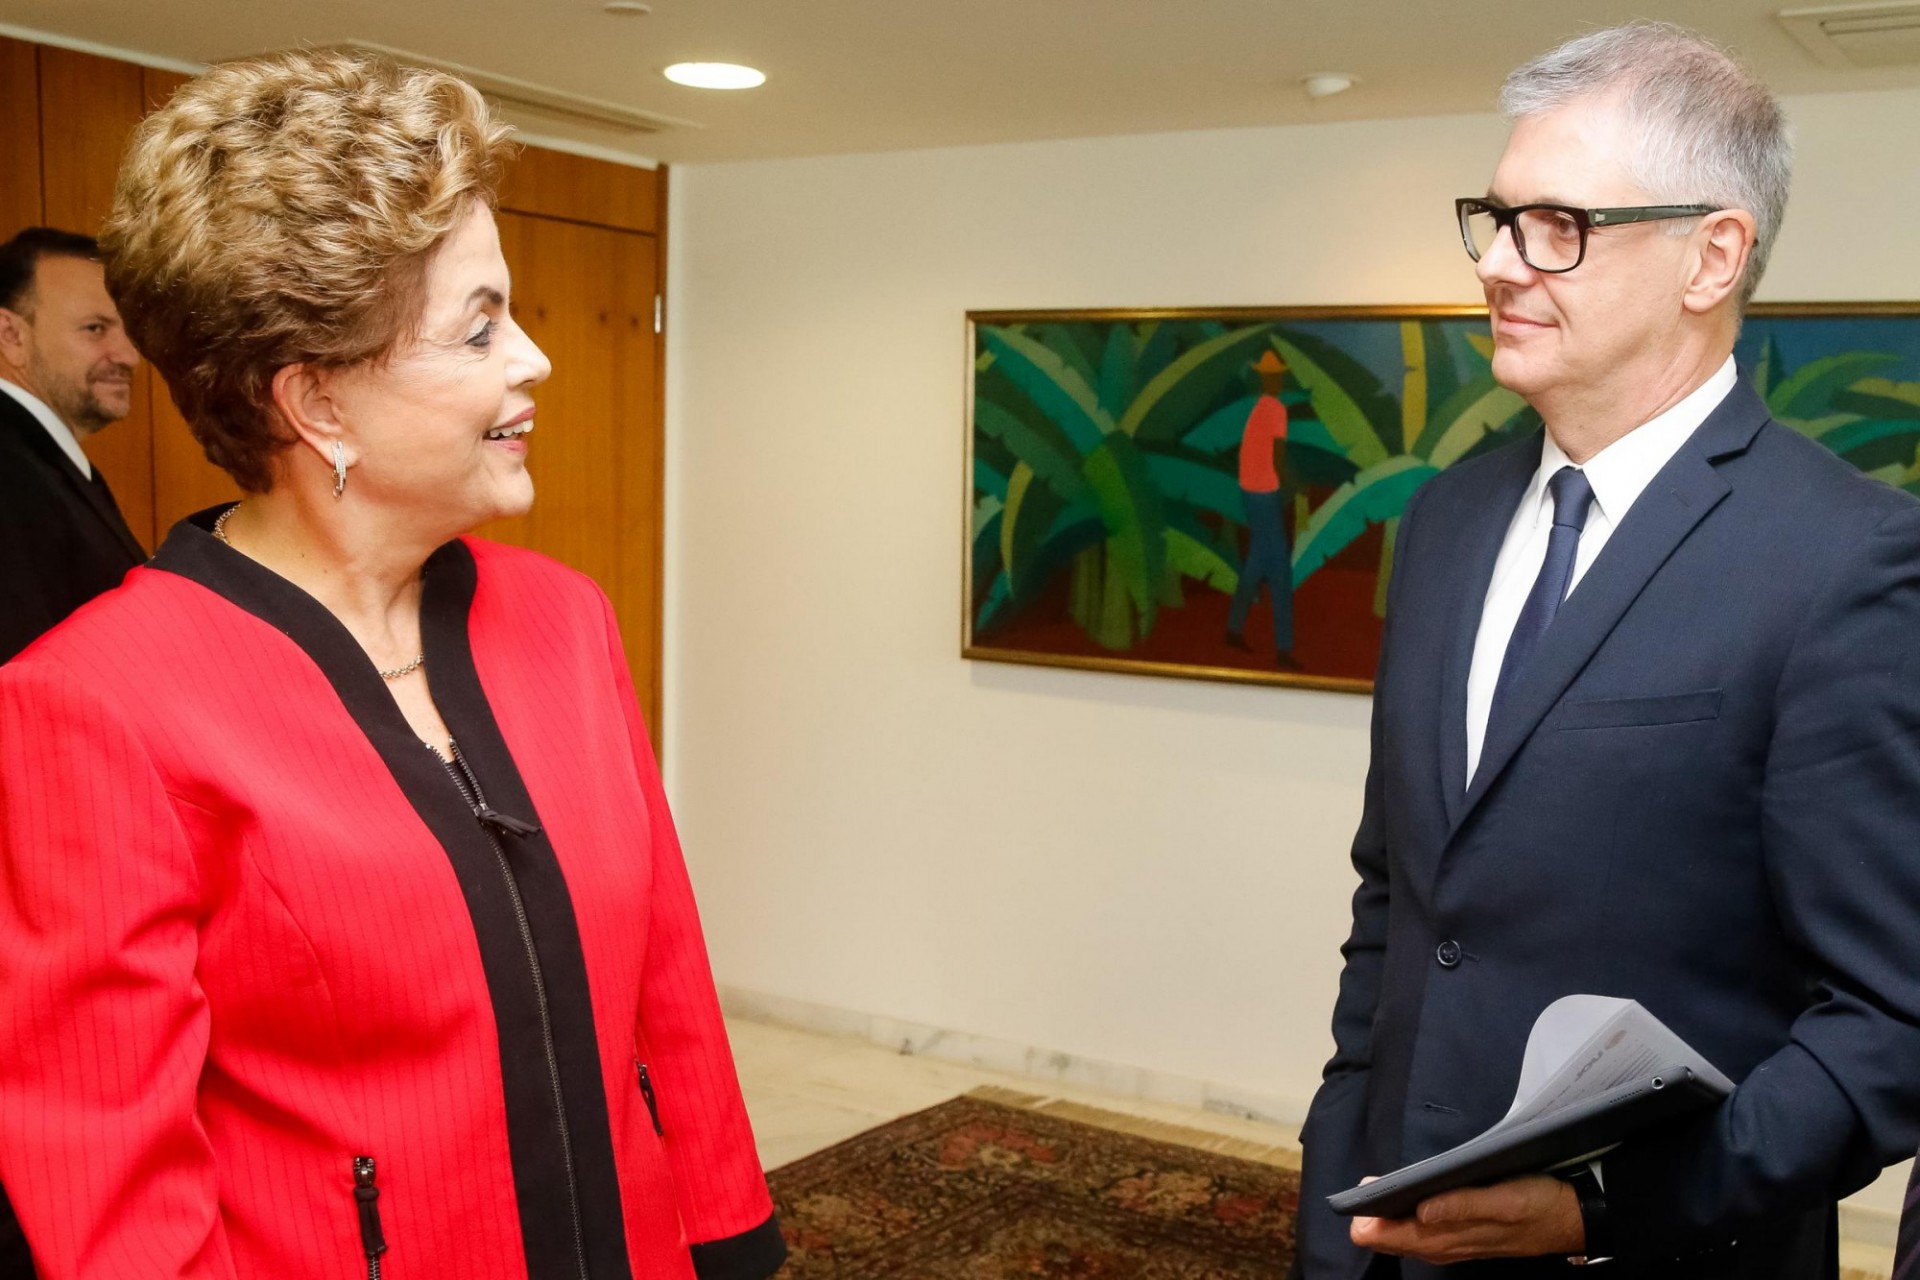 Fernando Rodrigues pictured with former president of Brazil, Dilma Rousseff